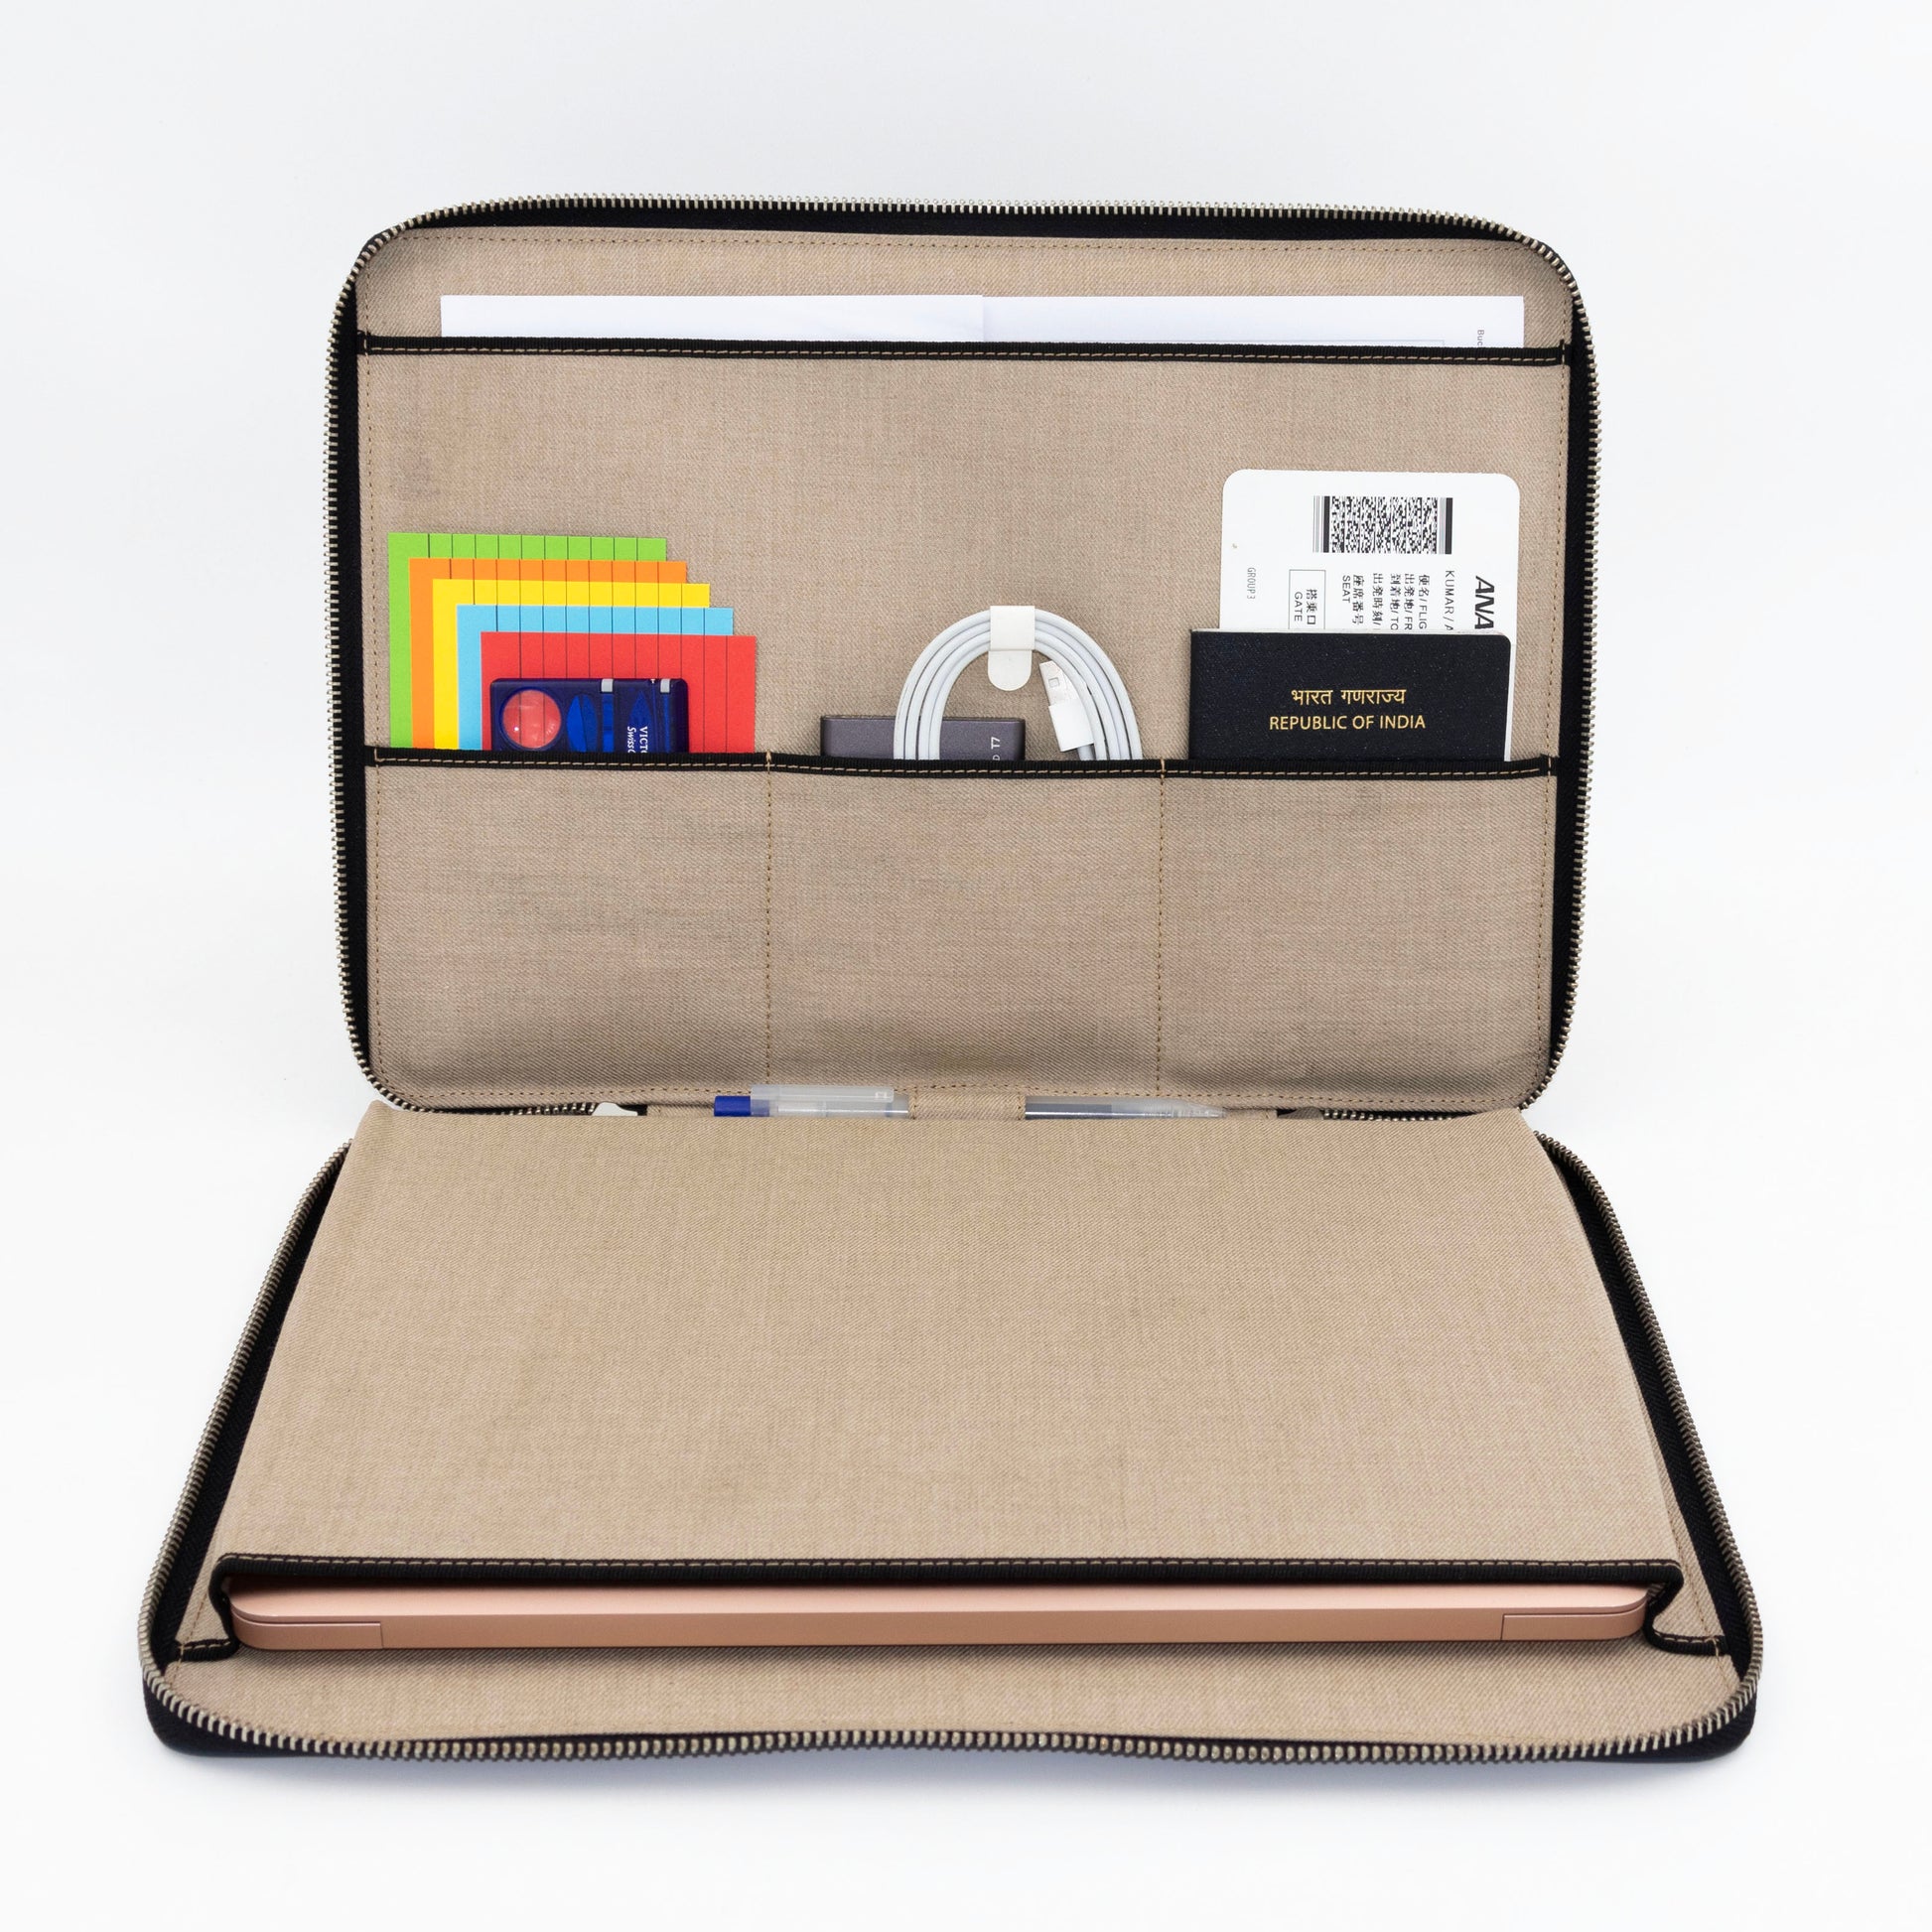 Leather Laptop Case lined with soft, viscose fabric for the interior. The case keeps your device protected at all times